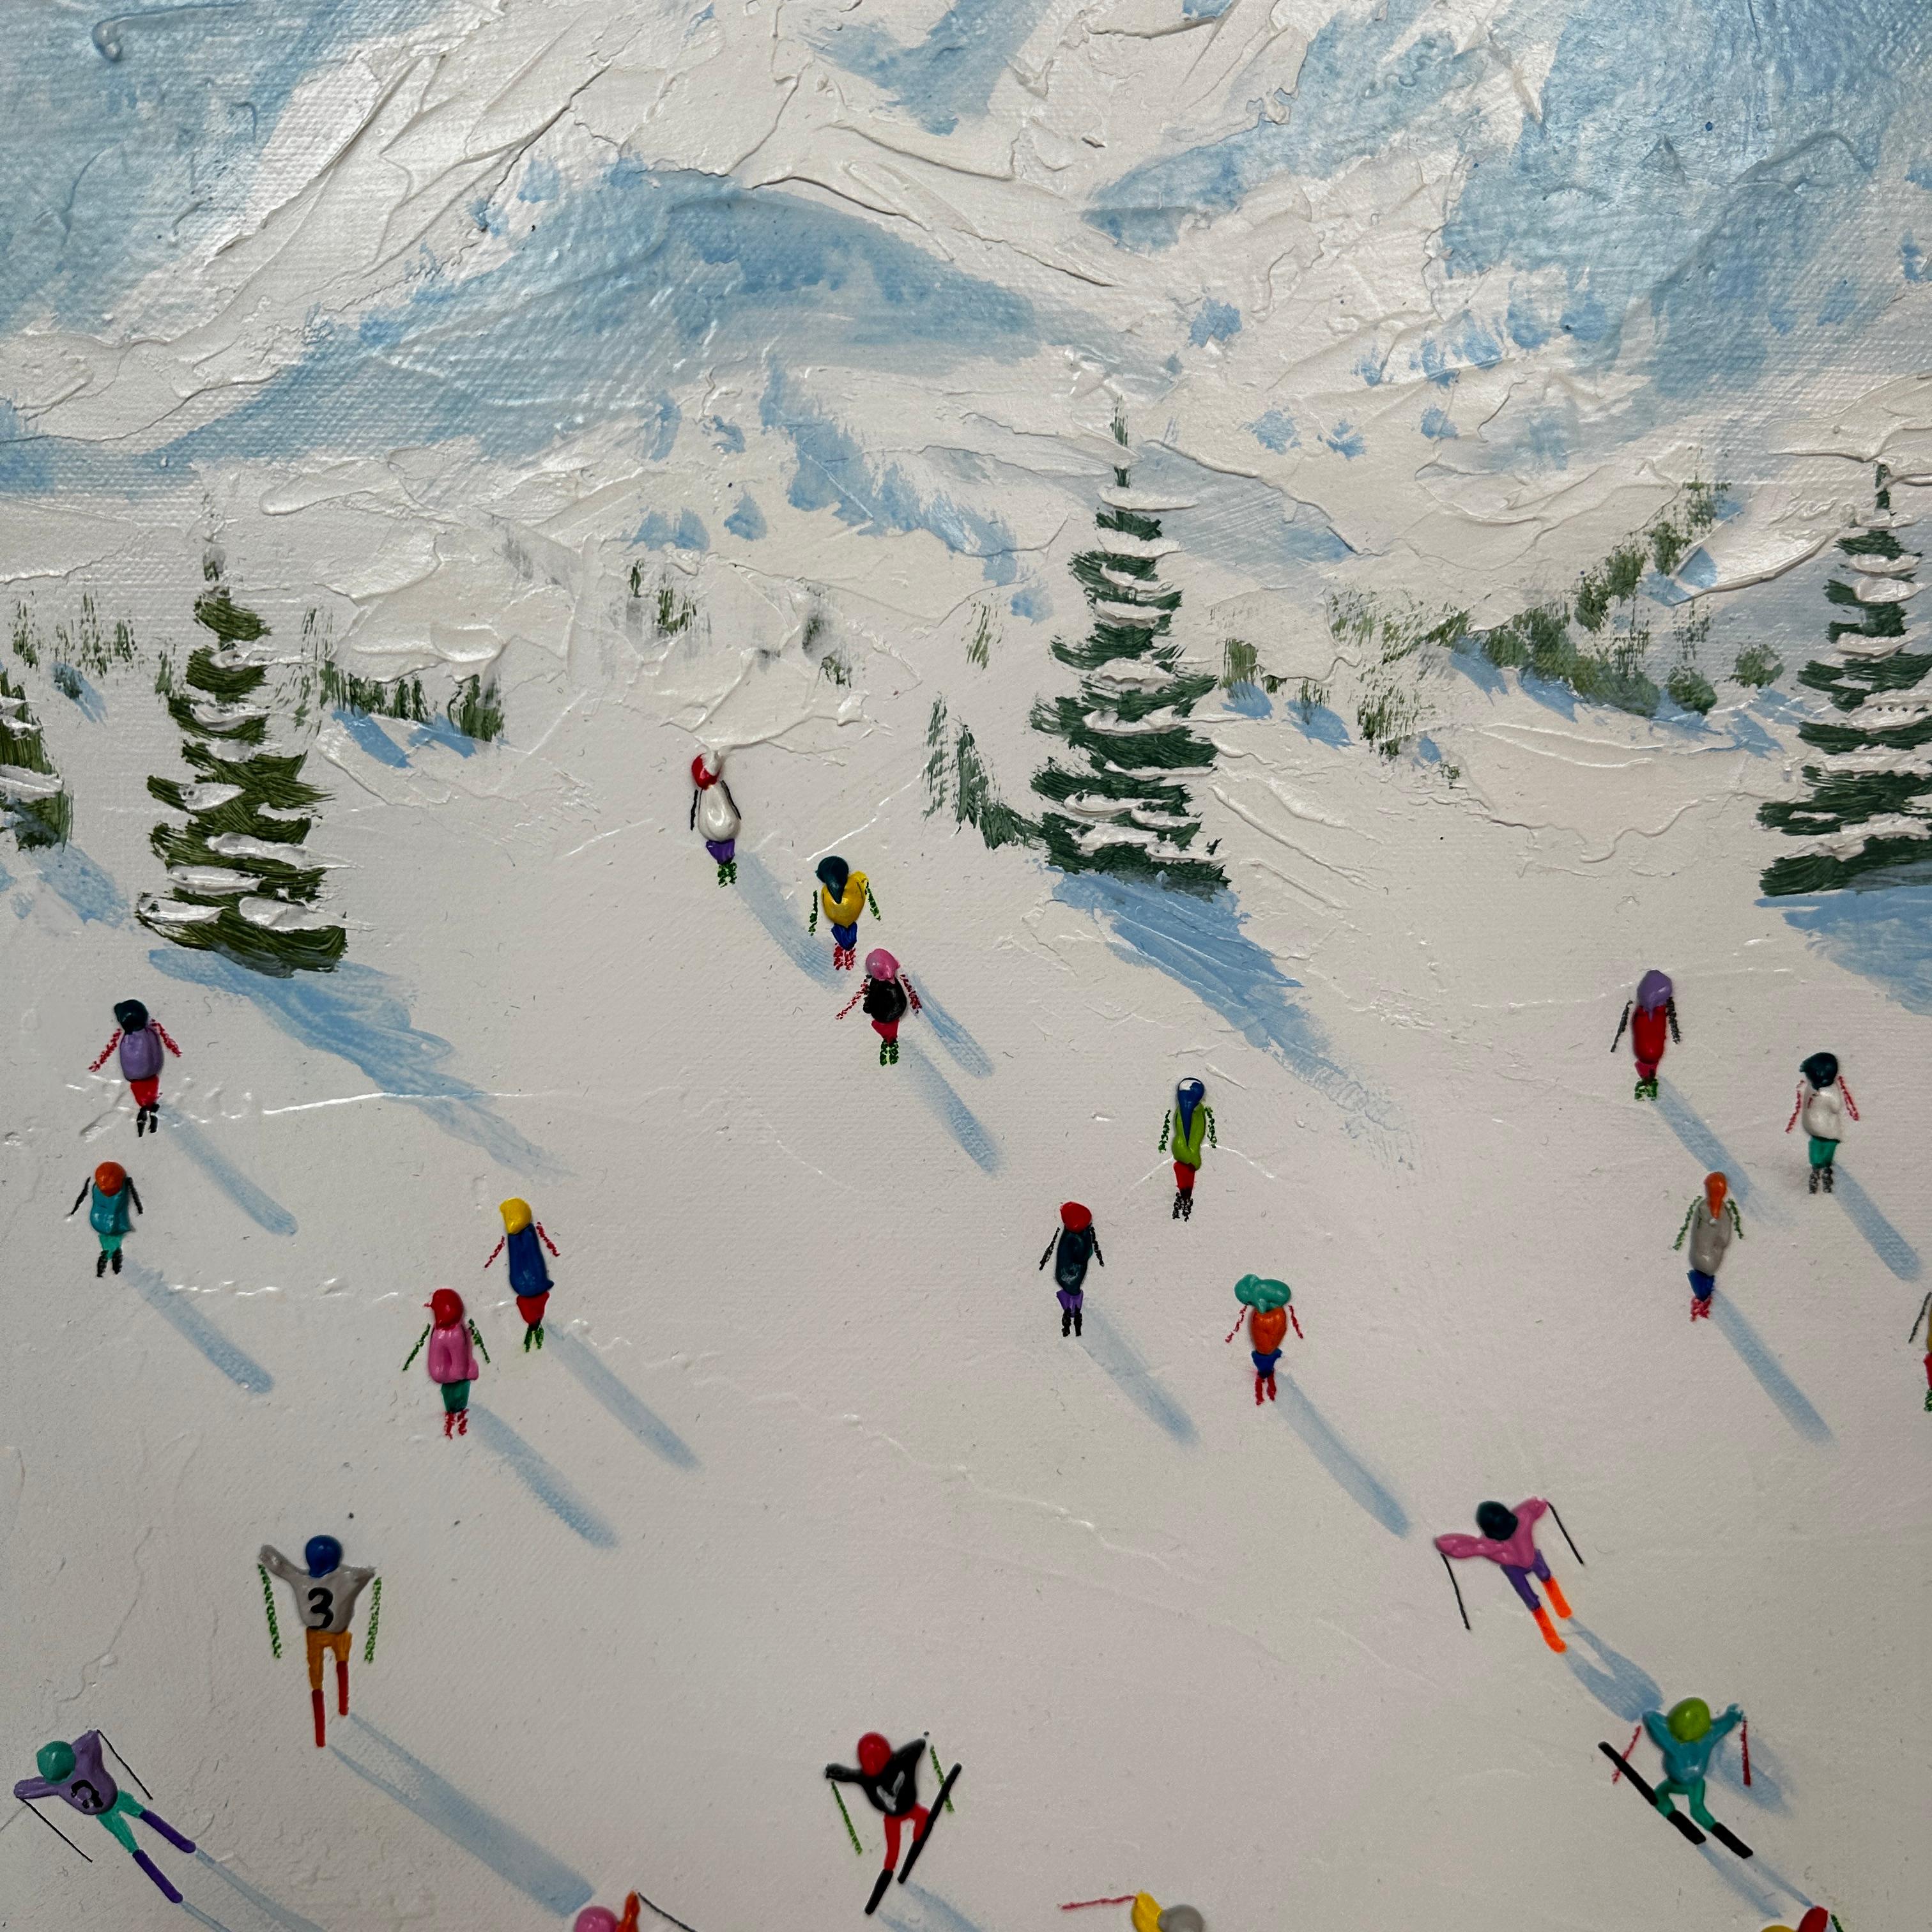 'The Ski Trip' Contemporary 3D painting of figures, mountains, slopes and trees - Painting by Max Todd